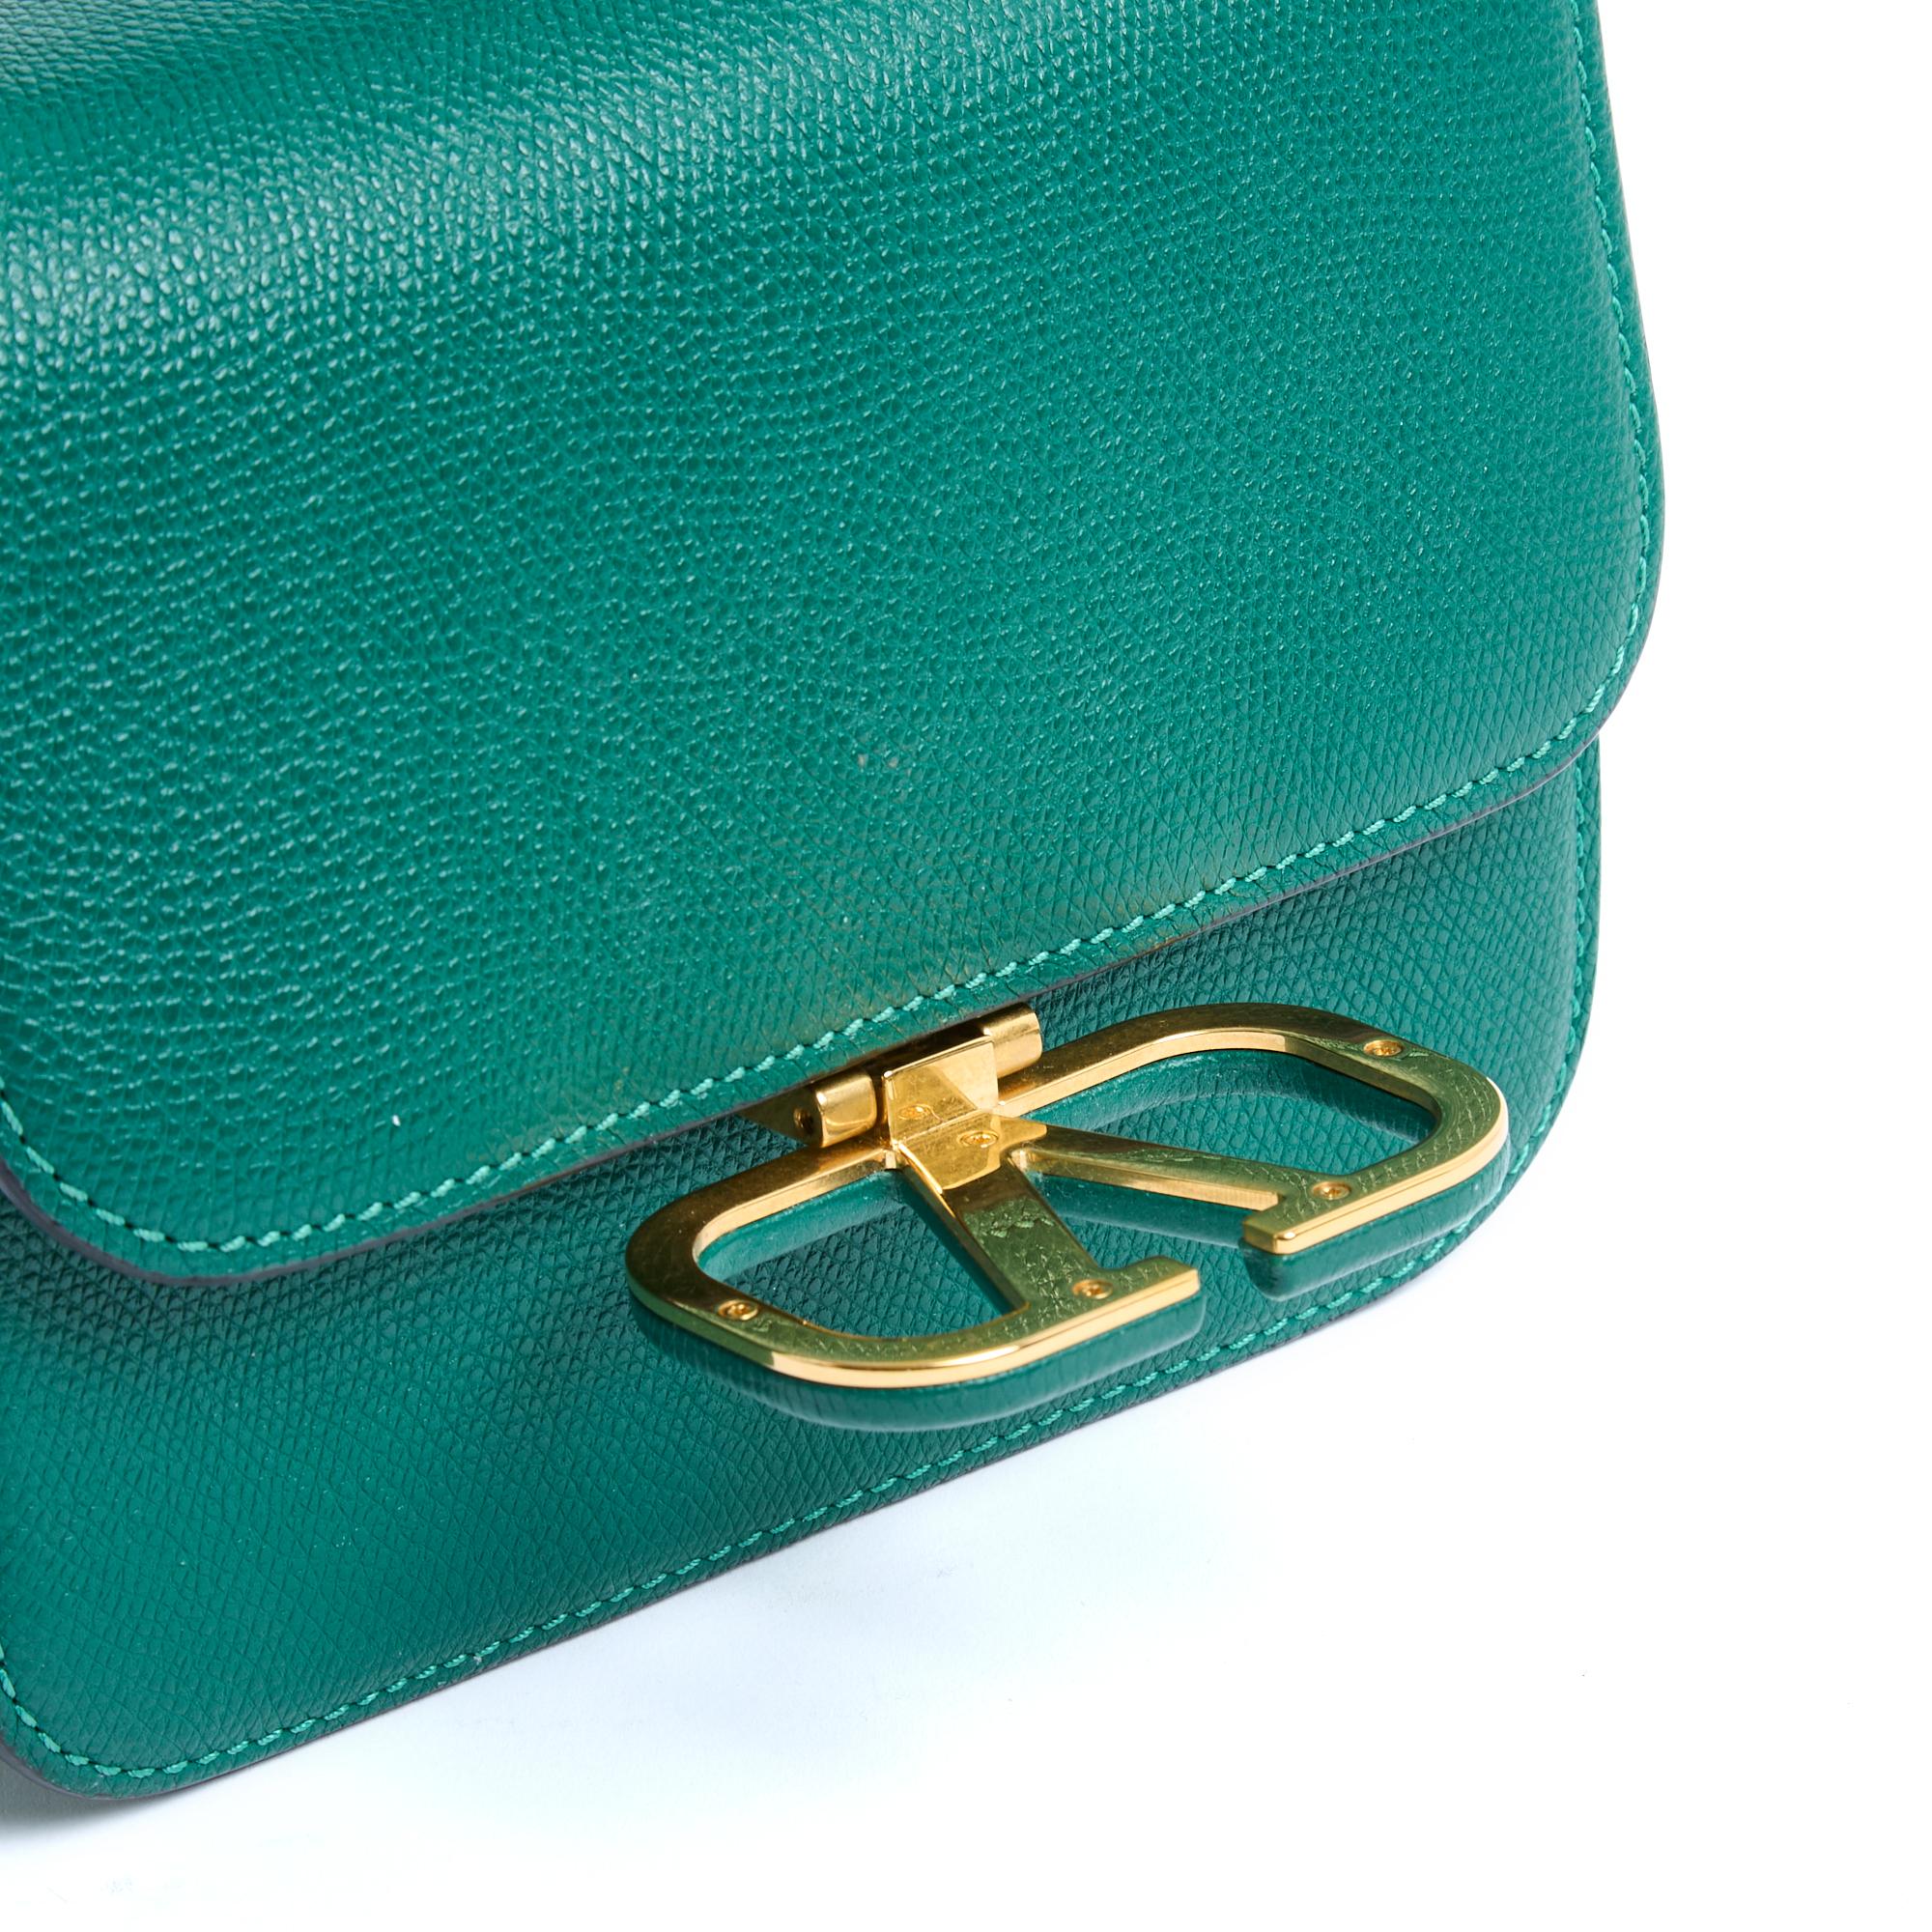 2020 Valentino VLogo green leather small bag For Sale 2